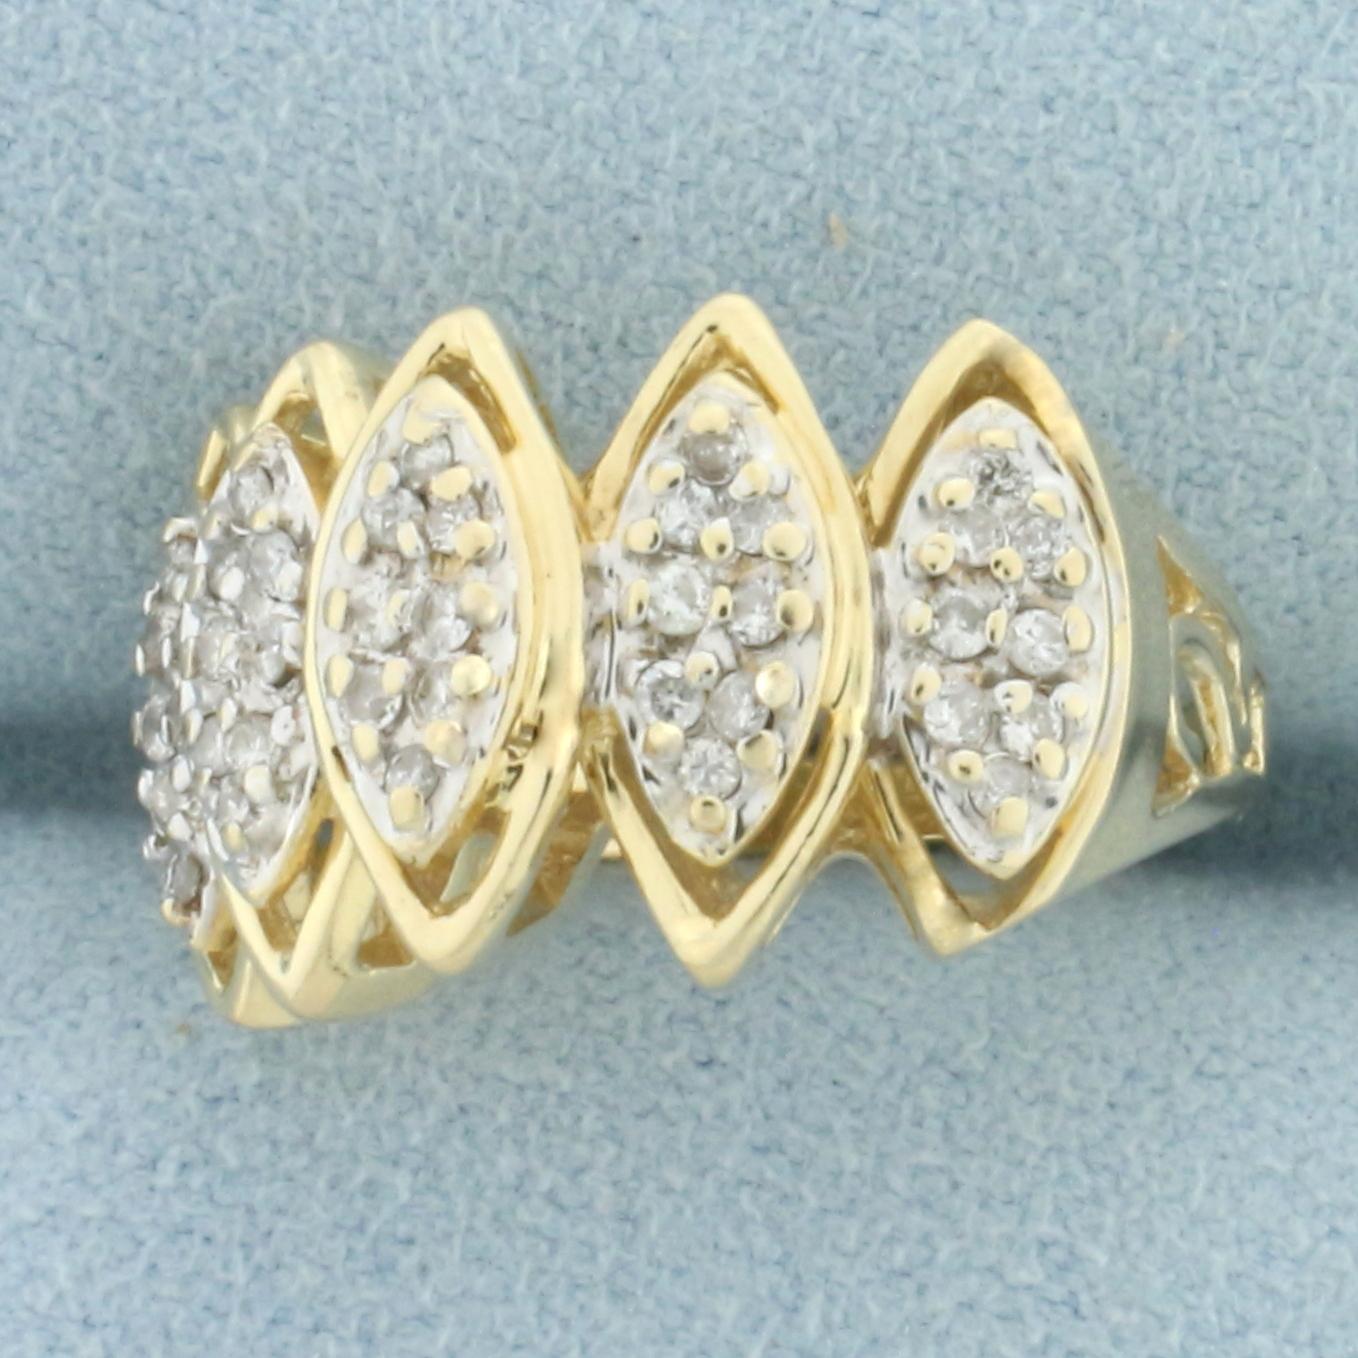 Vintage Pave Diamond Pave Ring In 14k Yellow Gold